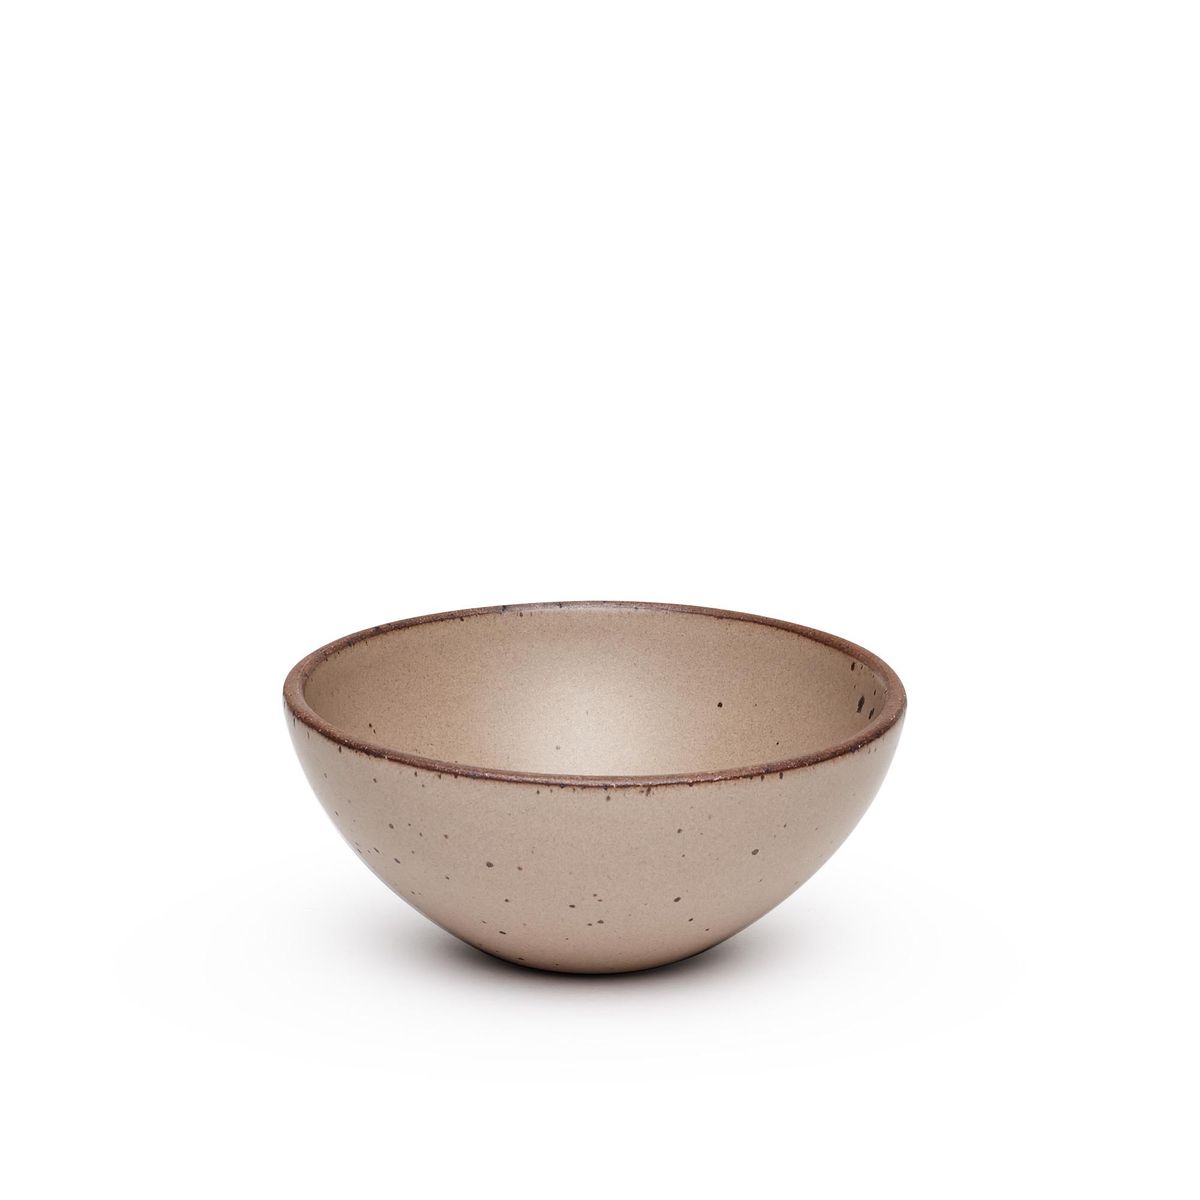 A medium rounded ceramic bowl in a warm pale brown color featuring iron speckles and an unglazed rim